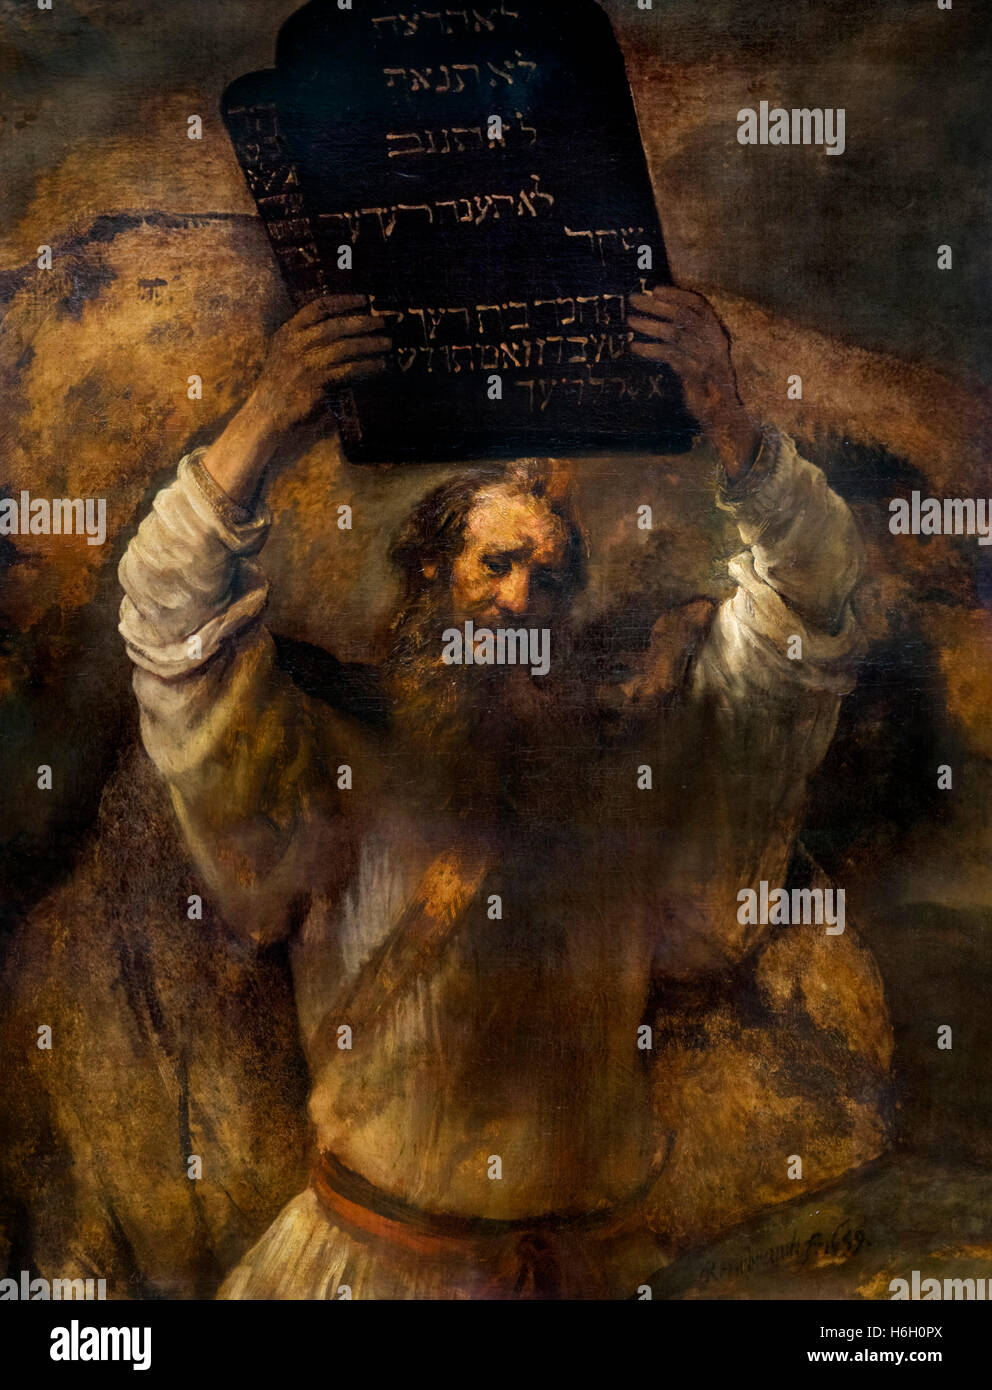 Moses Breaking the Tablets of the Law by Rembrandt van Rijn, oil on canvas, 1659. The painting depicts Moses smashing the tablets on which God had written the Ten Commandments. Stock Photo